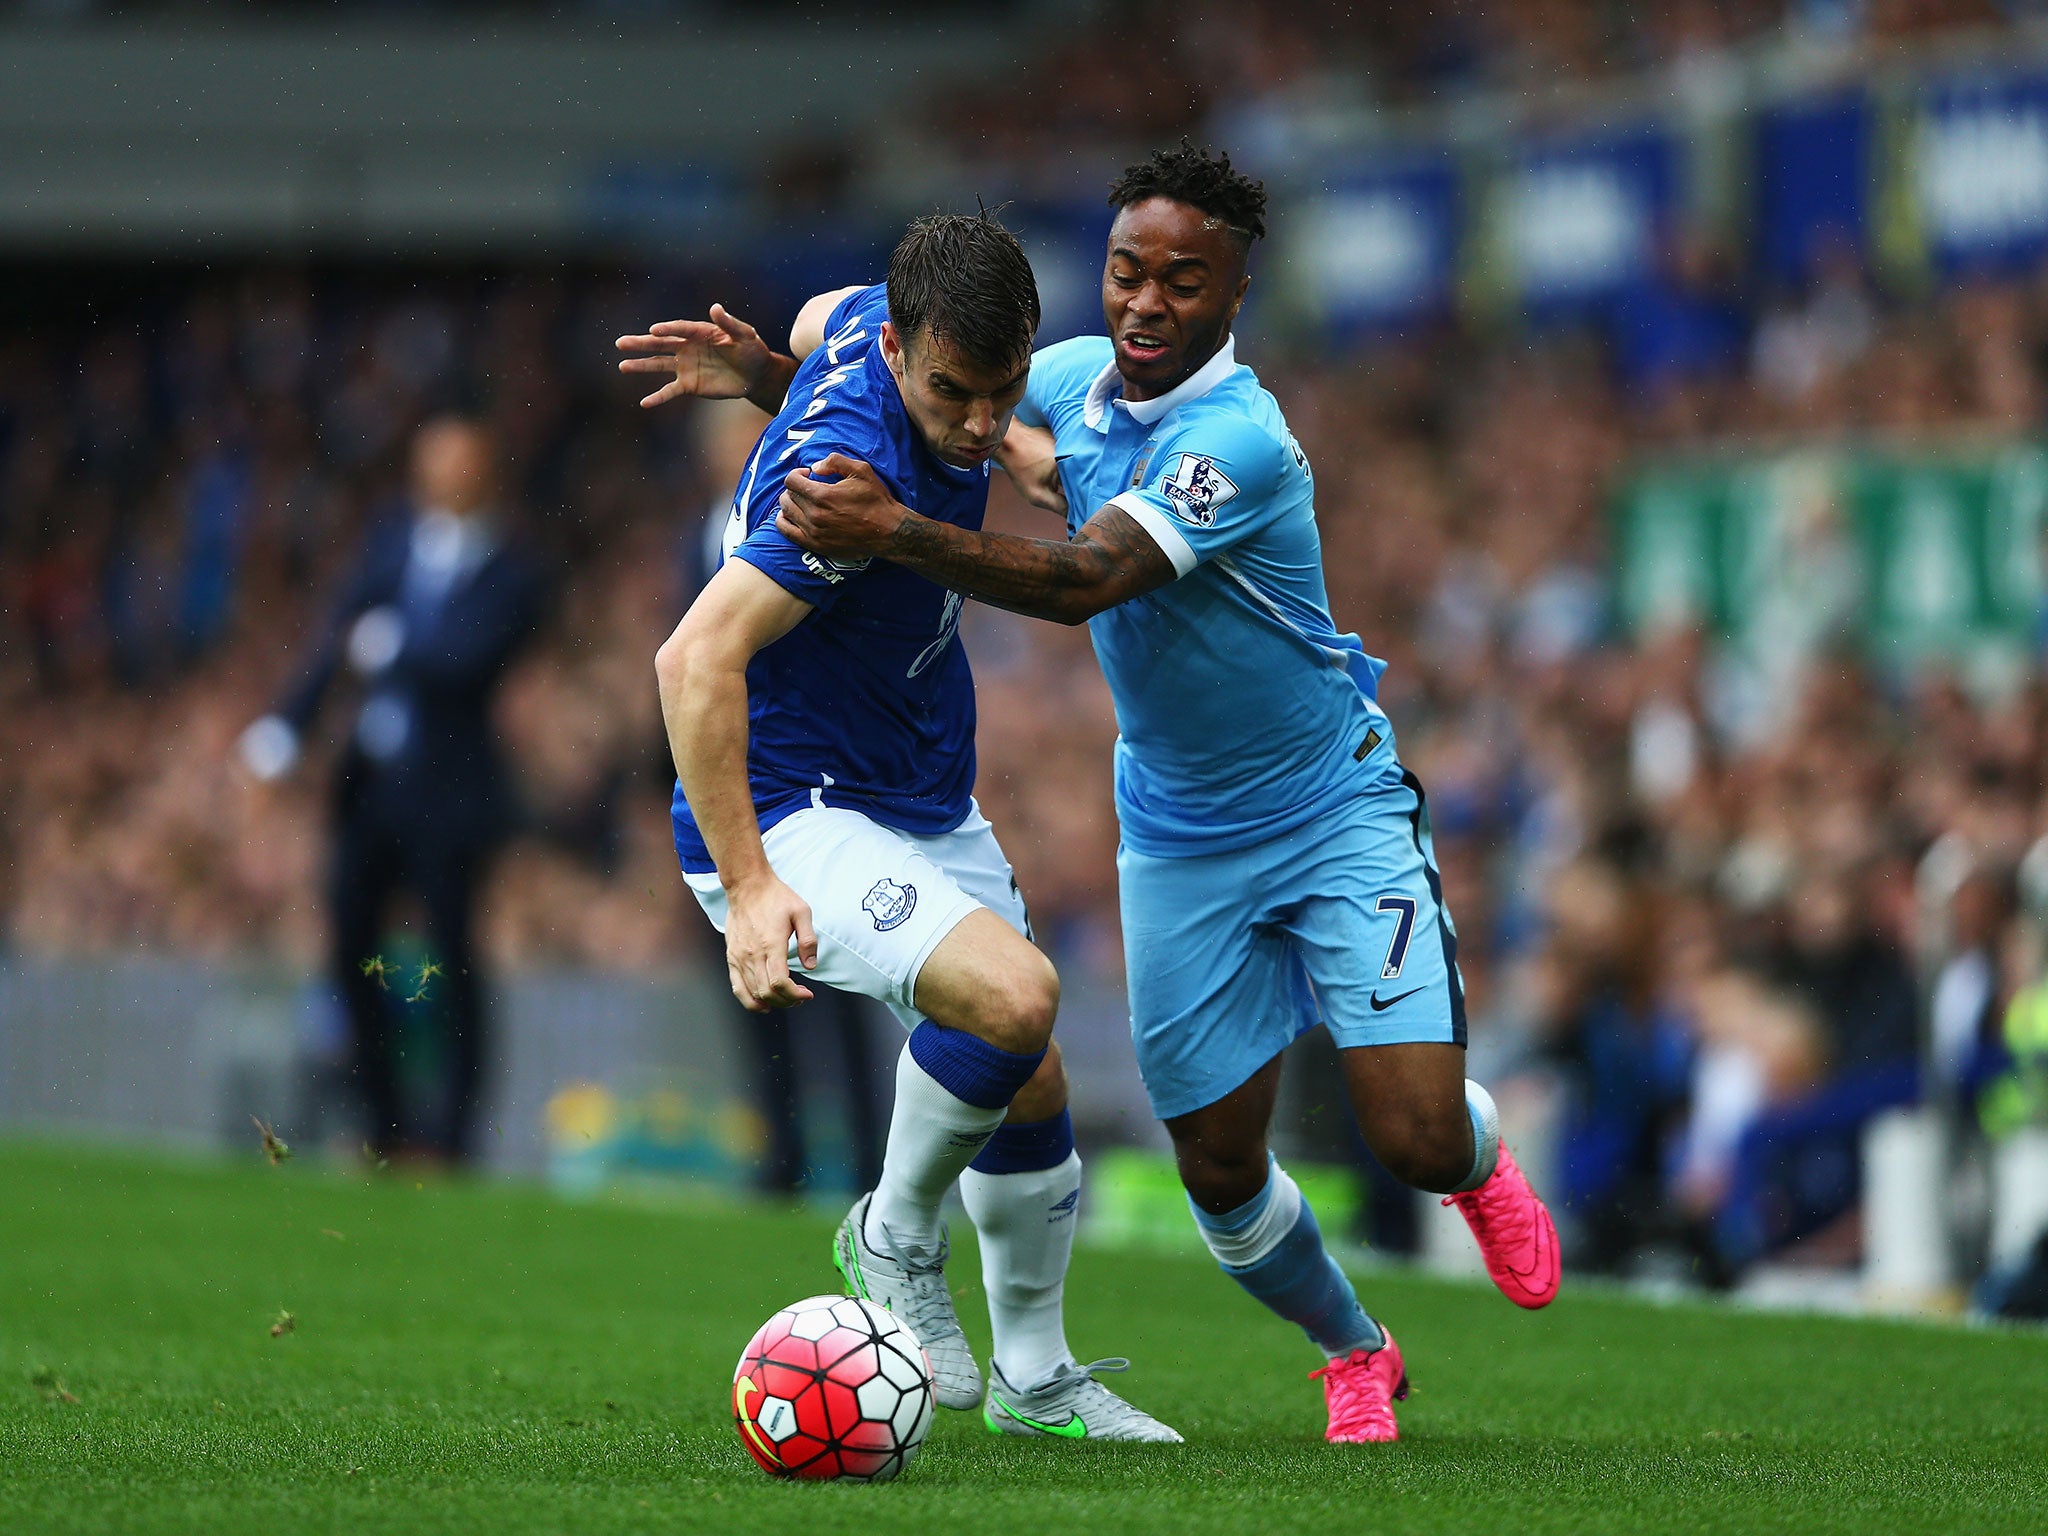 Raheem Sterling (right) battles with Seamus Coleman for the ball